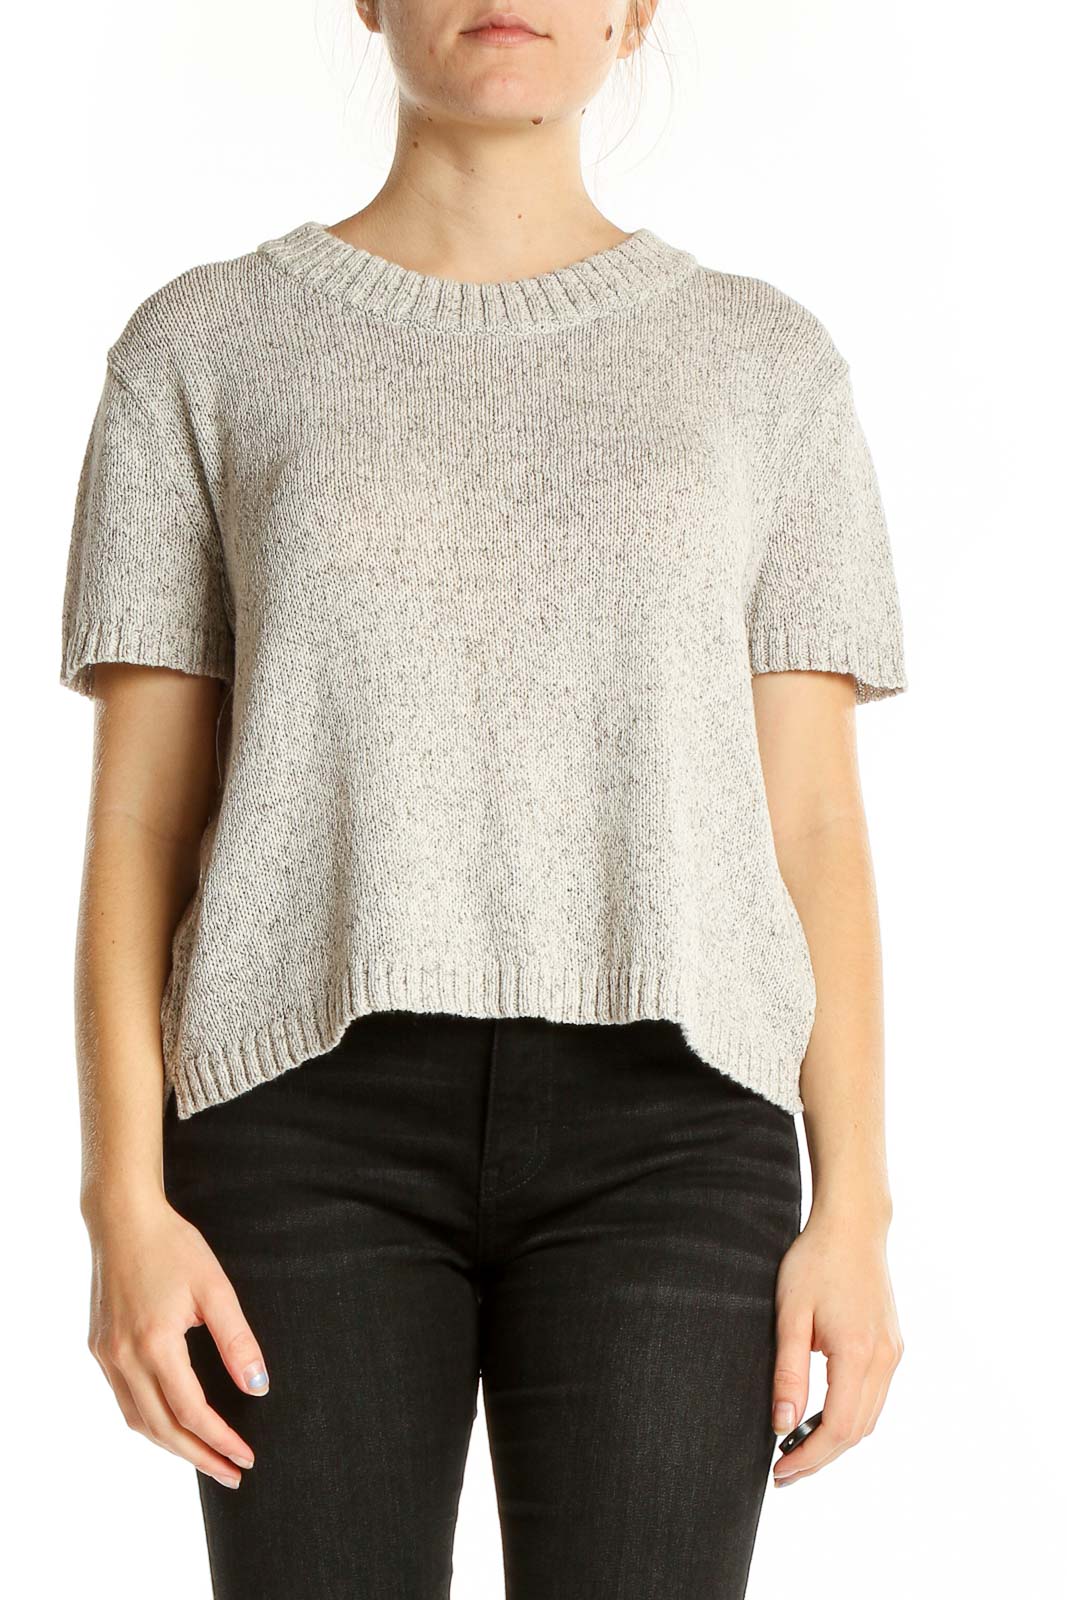 Gray Shorts Sleeve Texture Sweater Front